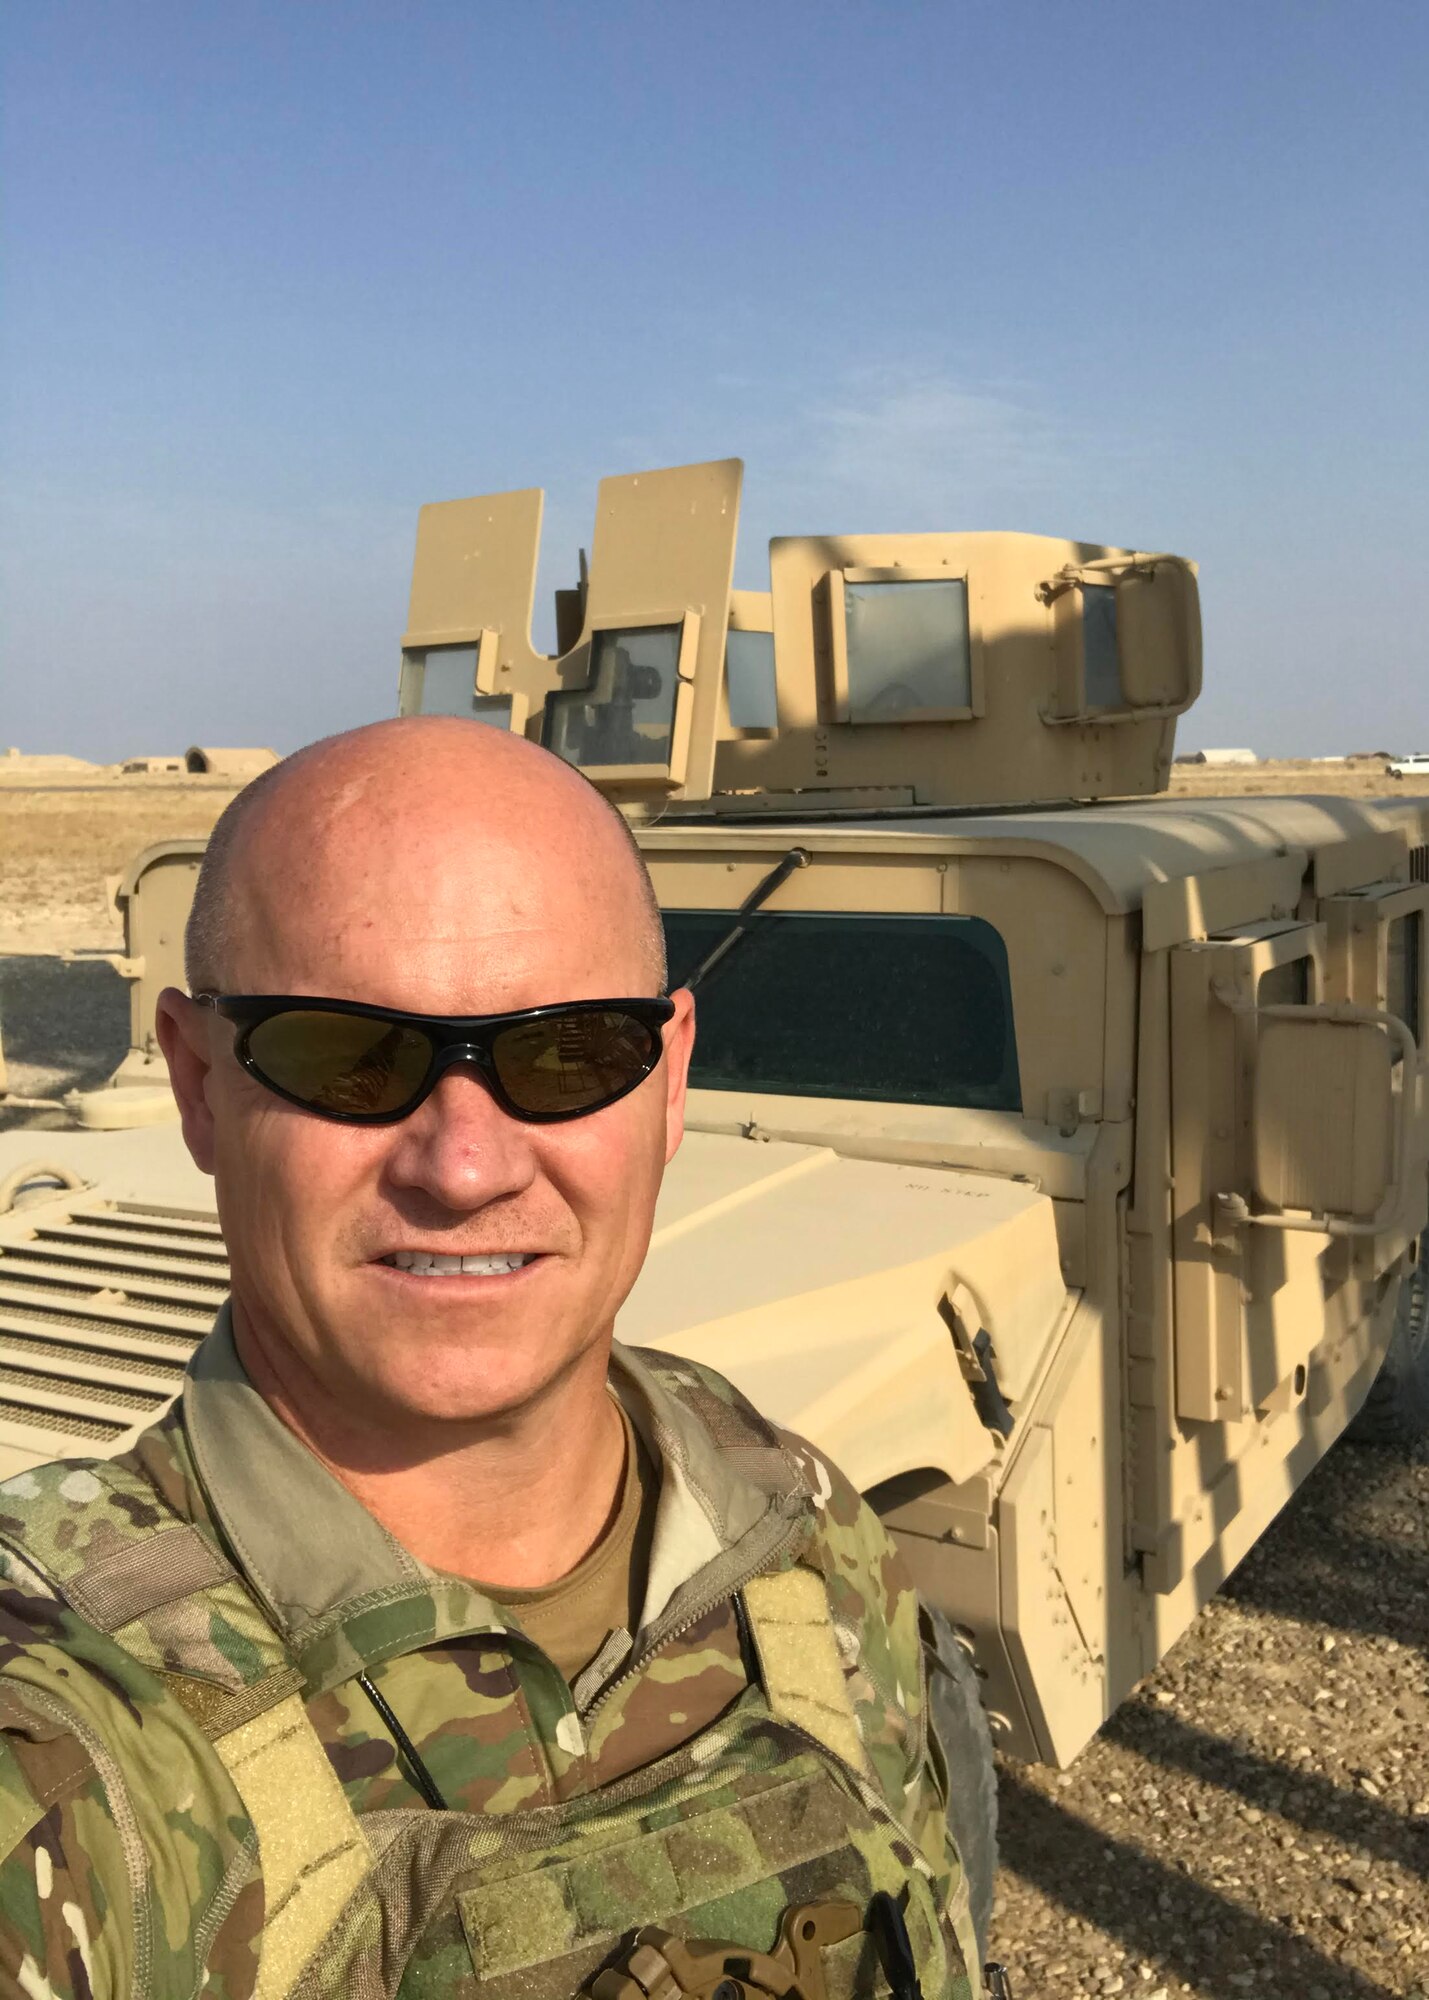 Senior Master Sgt. Rick Johnson, 69th Aerial Port Squadron operations flight chief, poses for a photo while on deployment to Baghdad, Iraq. Johnson was recently awarded the Bronze Star and Air Force Commendation Medal for his heroic efforts and meritorious achievement while deployed in support of Operation Inherent Resolve. (Courtesy Photo)